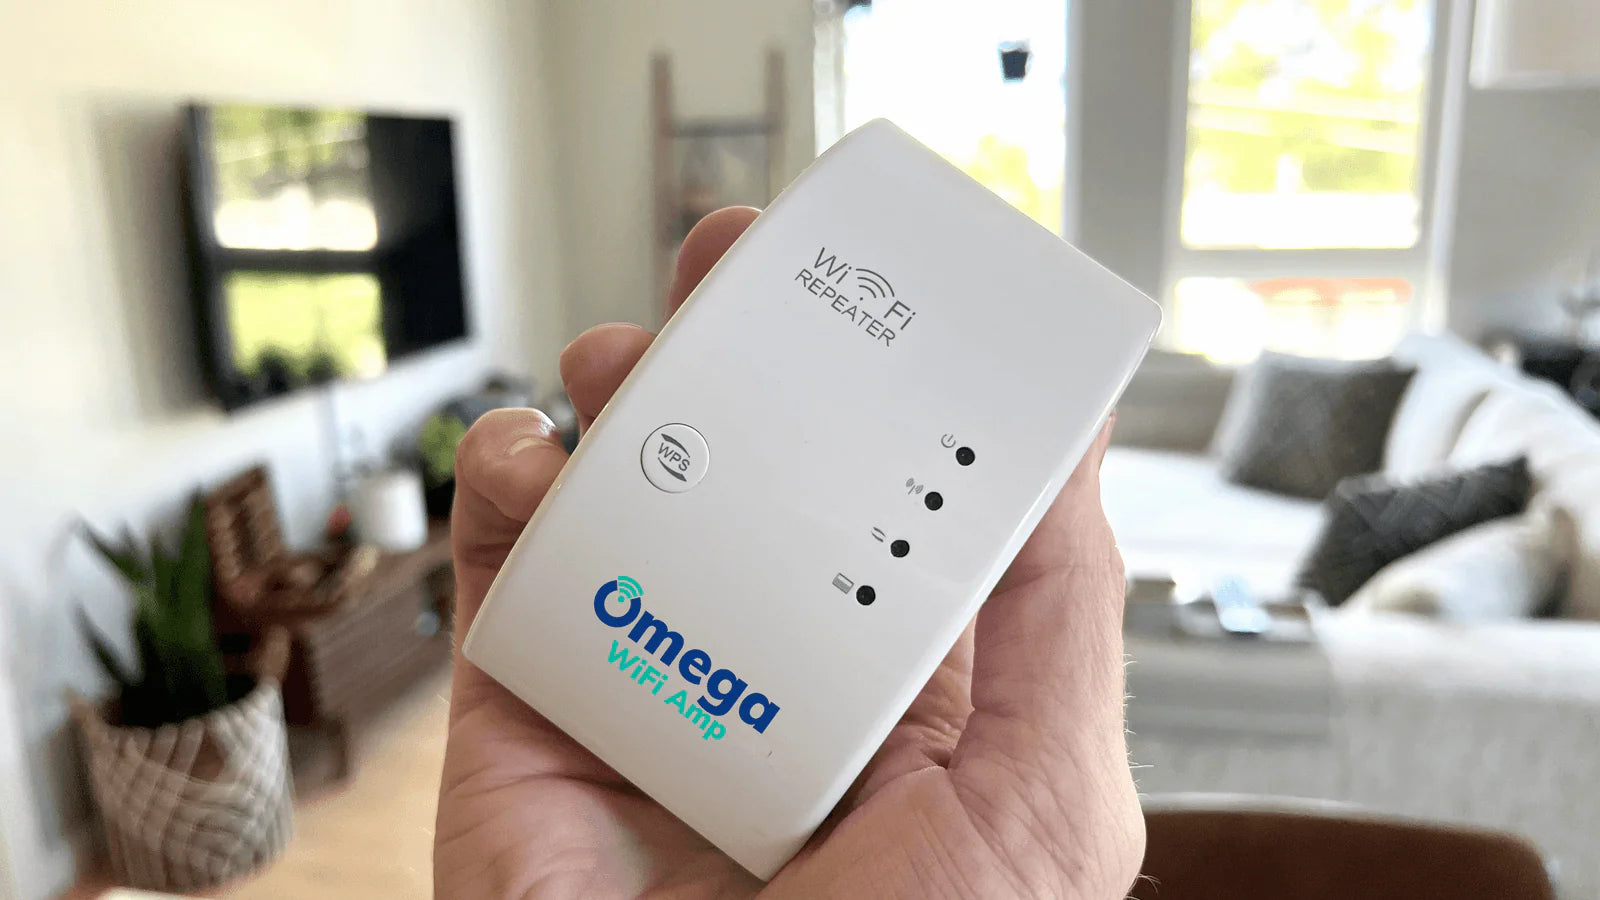 Omega WiFi Amp Reviews - Must Read Before You Buy!